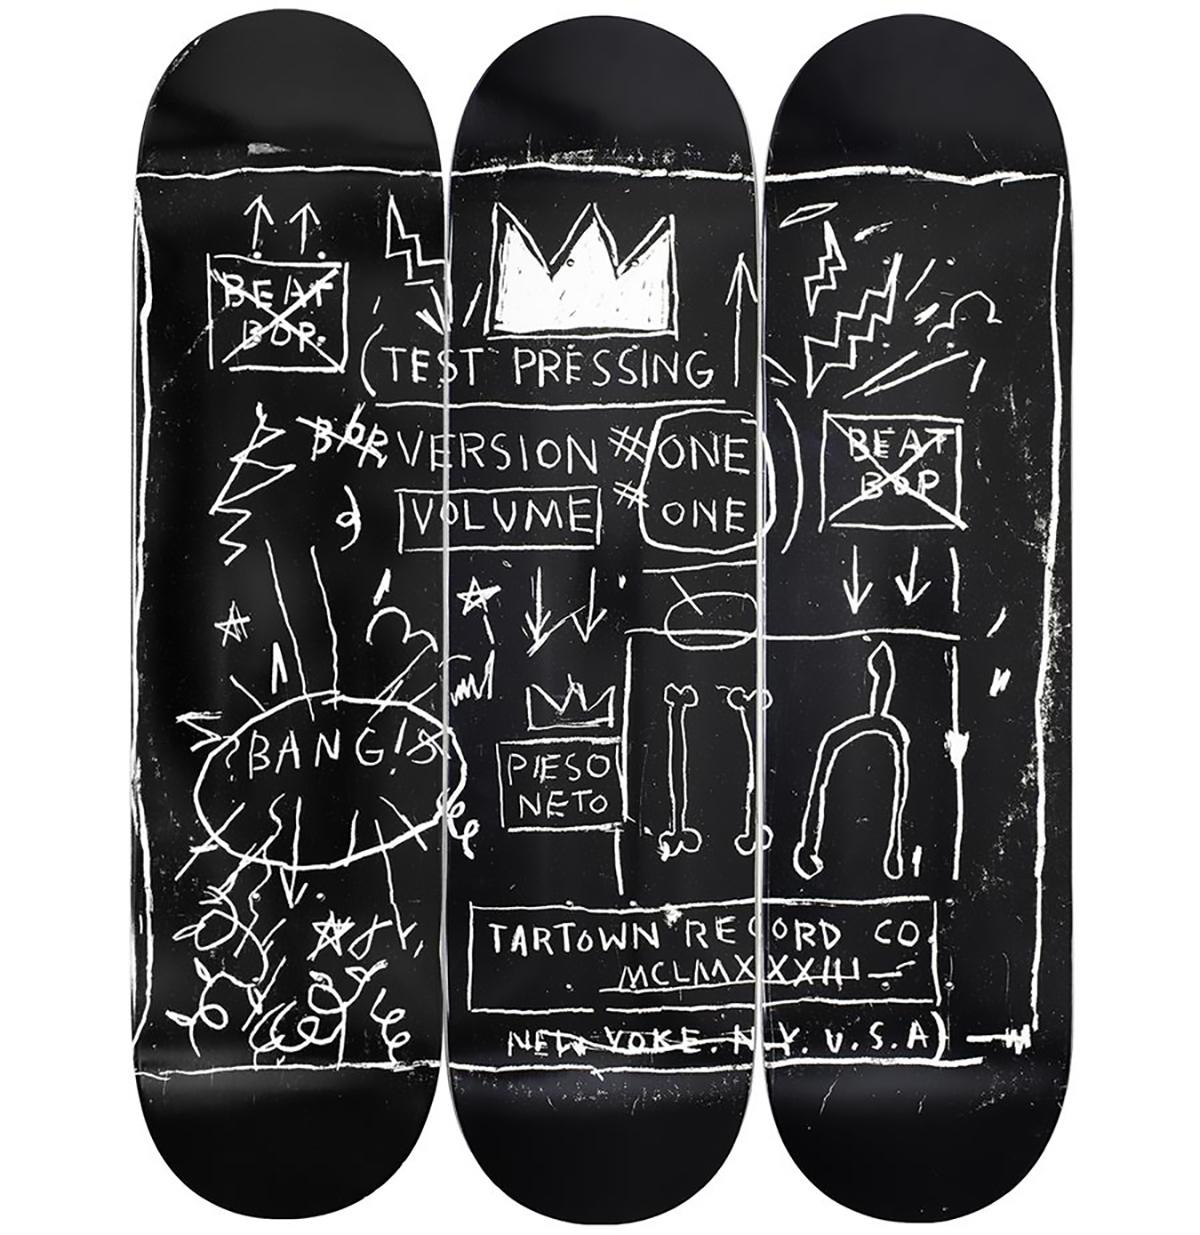 Basquiat Beat Bop Skateboard Decks (set of 3):
Jean-Michel Basquiat Skateboard Deck Triptych licensed by the Estate of Jean Michel Basquiat in conjunction with Artestar/Rome Pays Off, featuring brilliantly rendered imagery of the much iconic